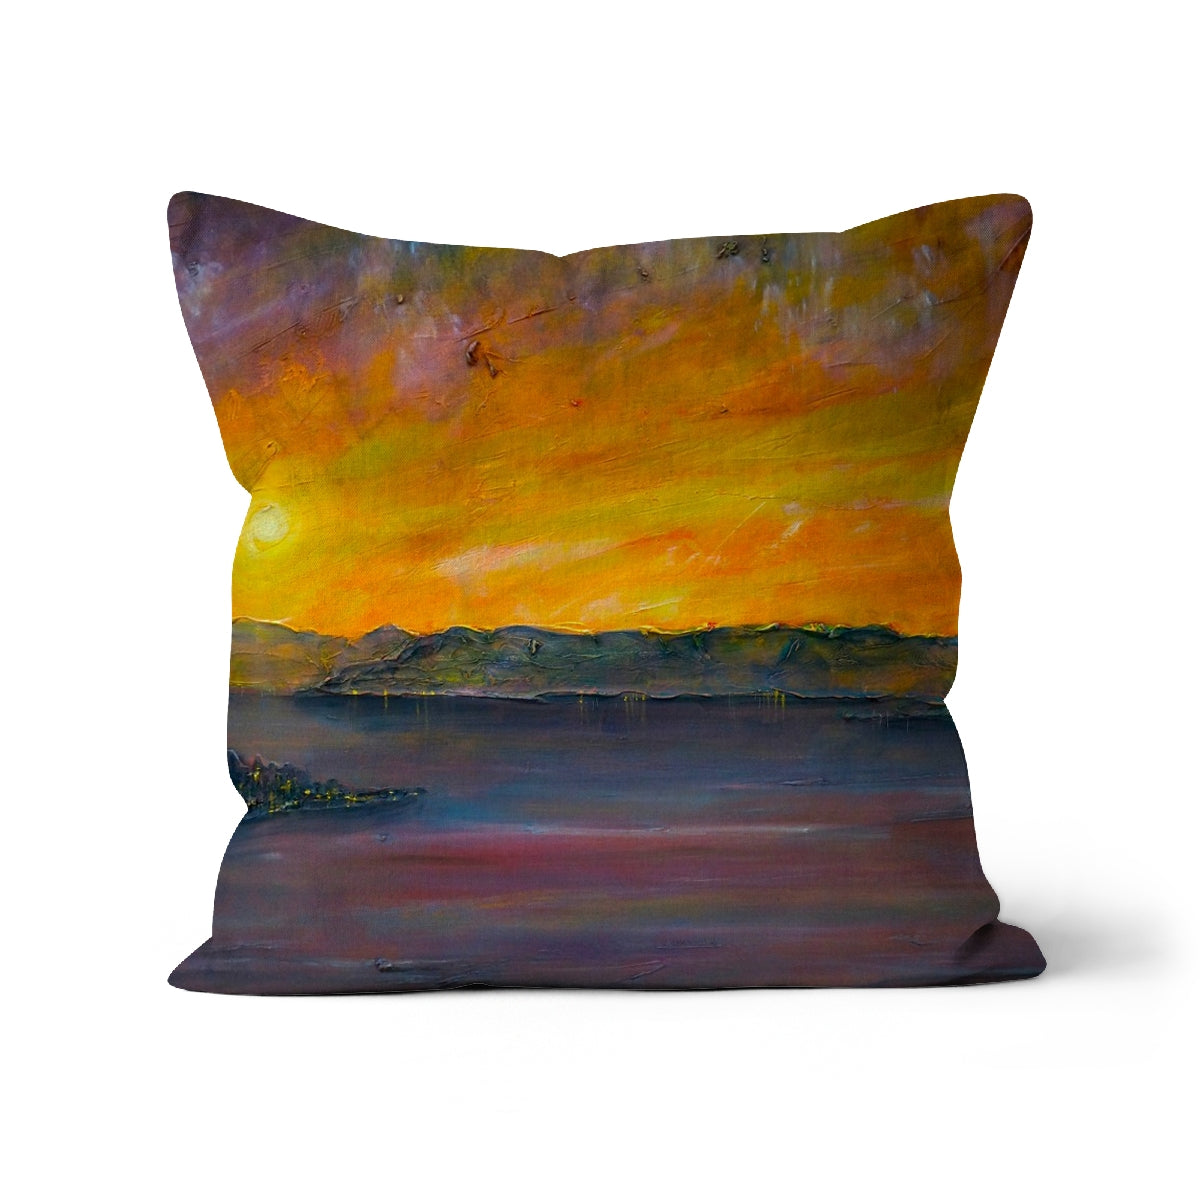 Sunset Over Gourock Art Gifts Cushion-Cushions-River Clyde Art Gallery-Faux Suede-22"x22"-Paintings, Prints, Homeware, Art Gifts From Scotland By Scottish Artist Kevin Hunter